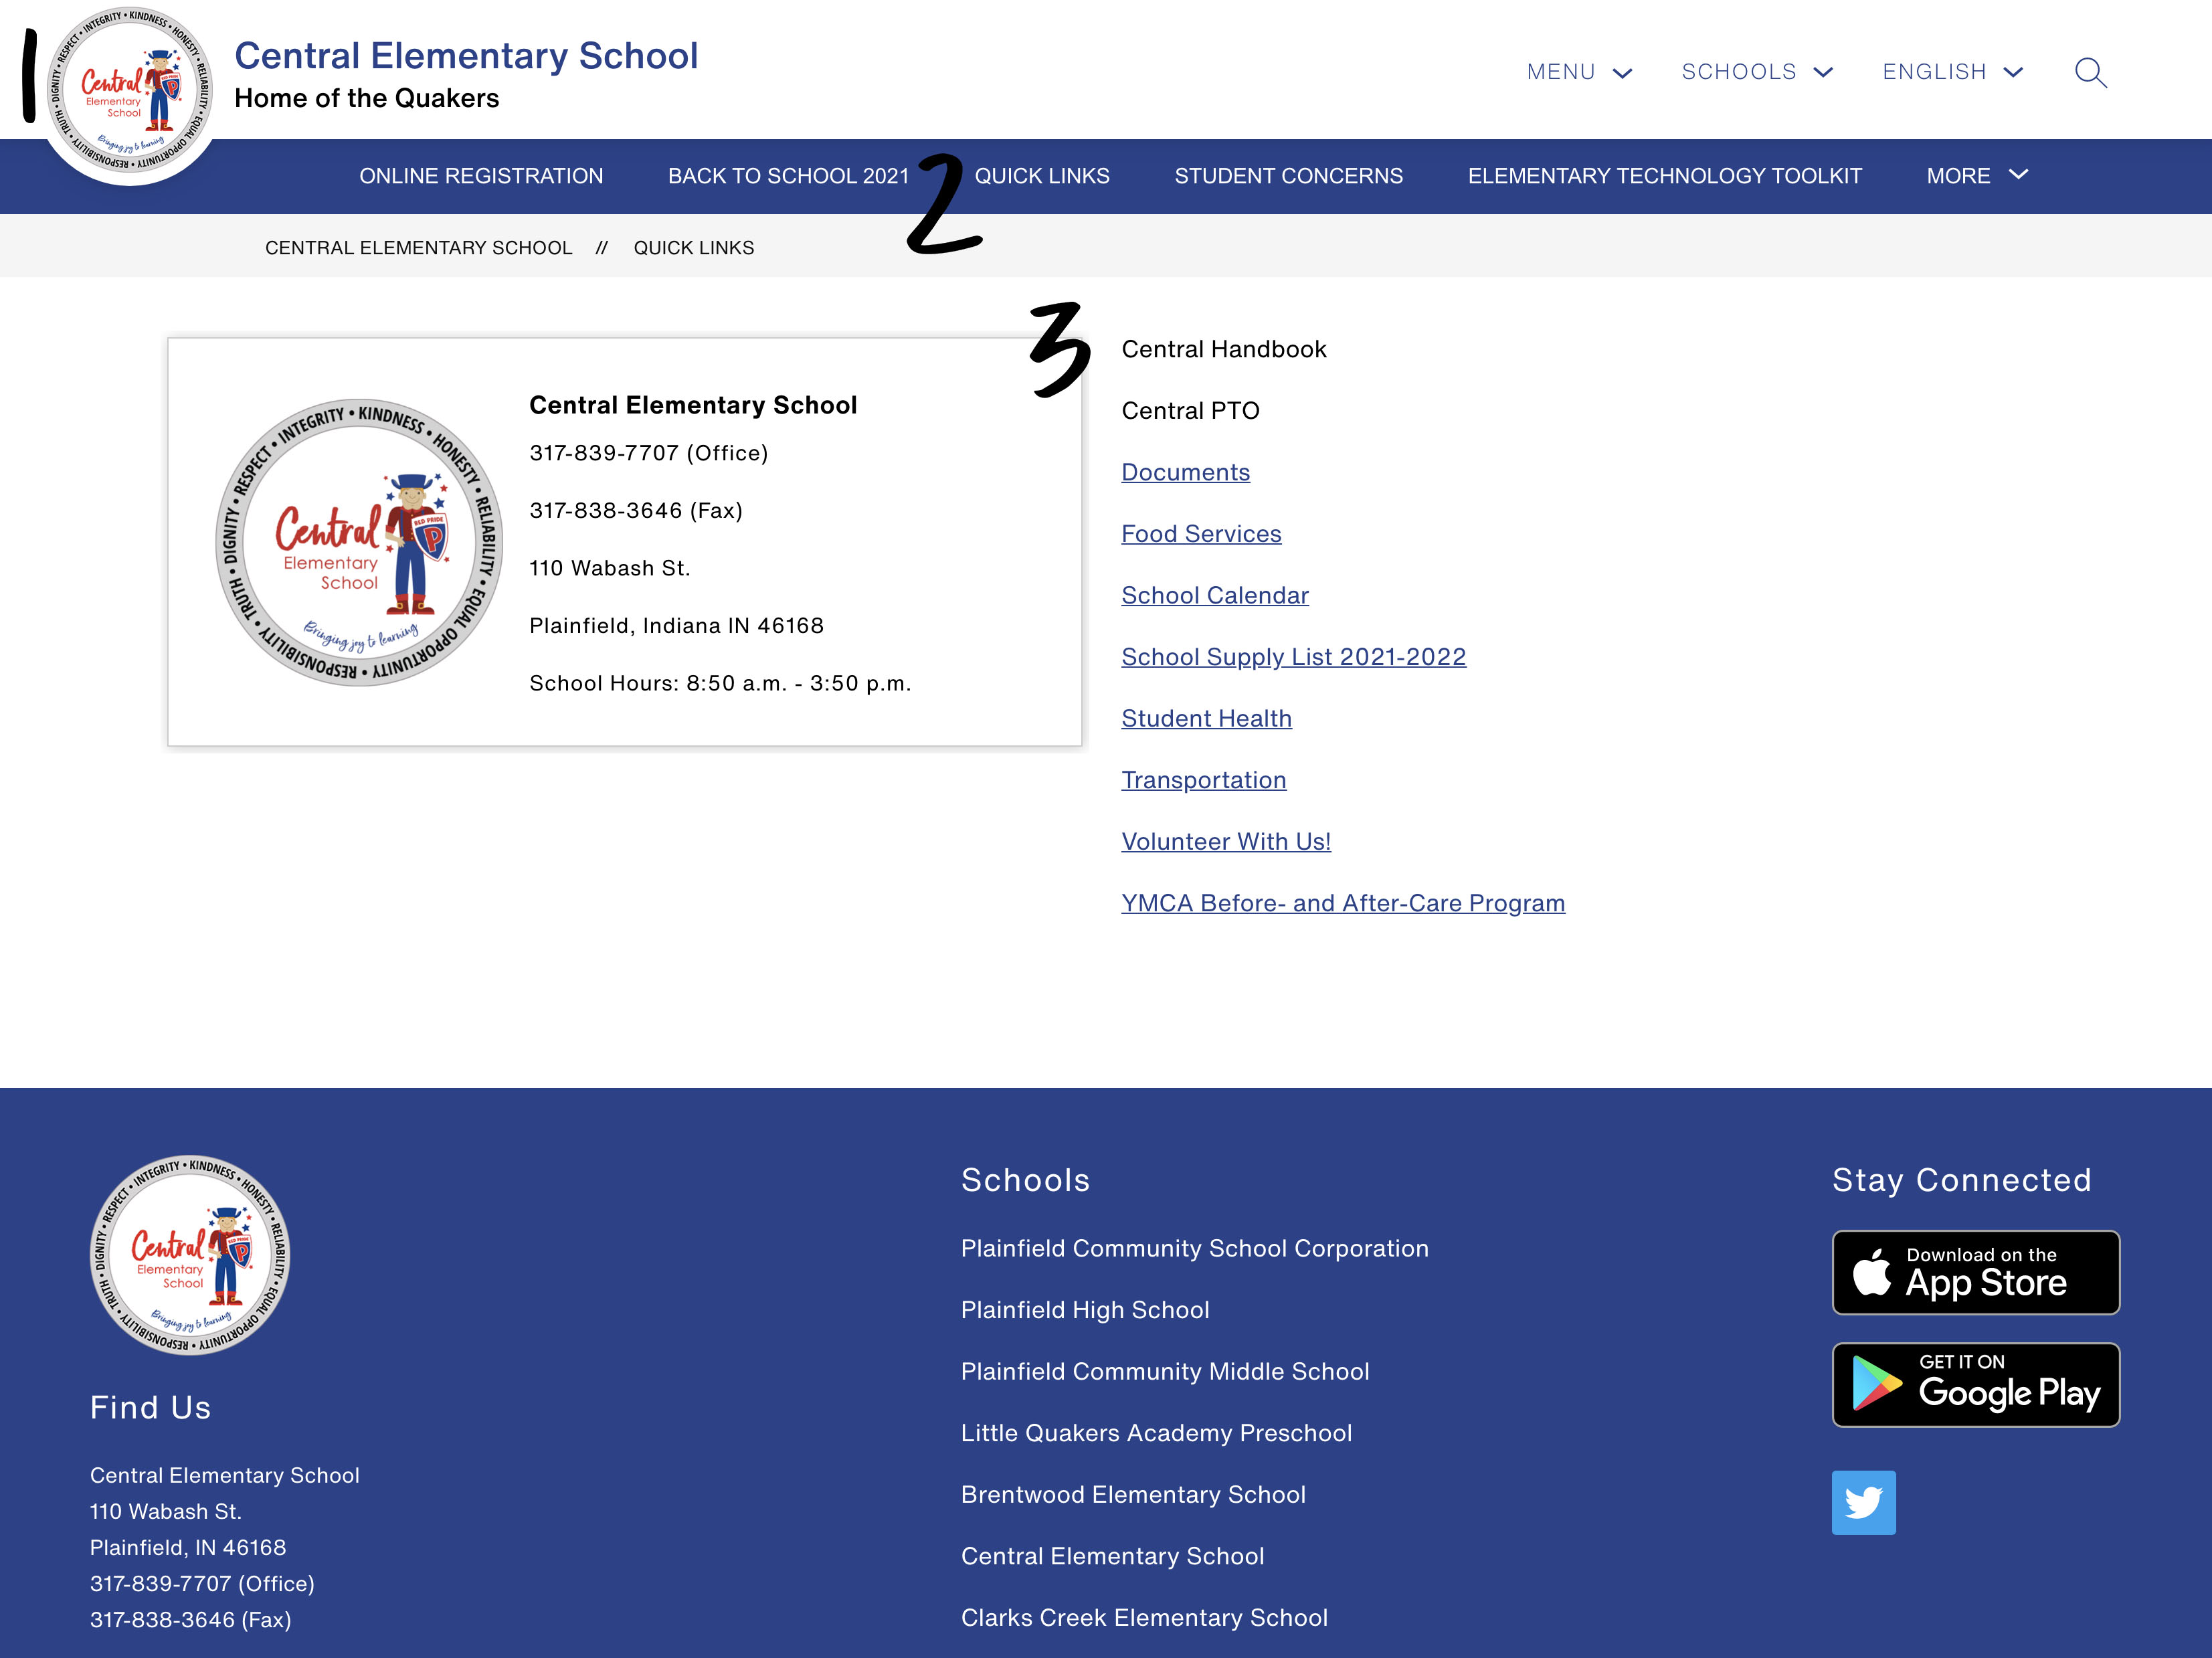 A screenshot of Central Elementary's Quick Links page